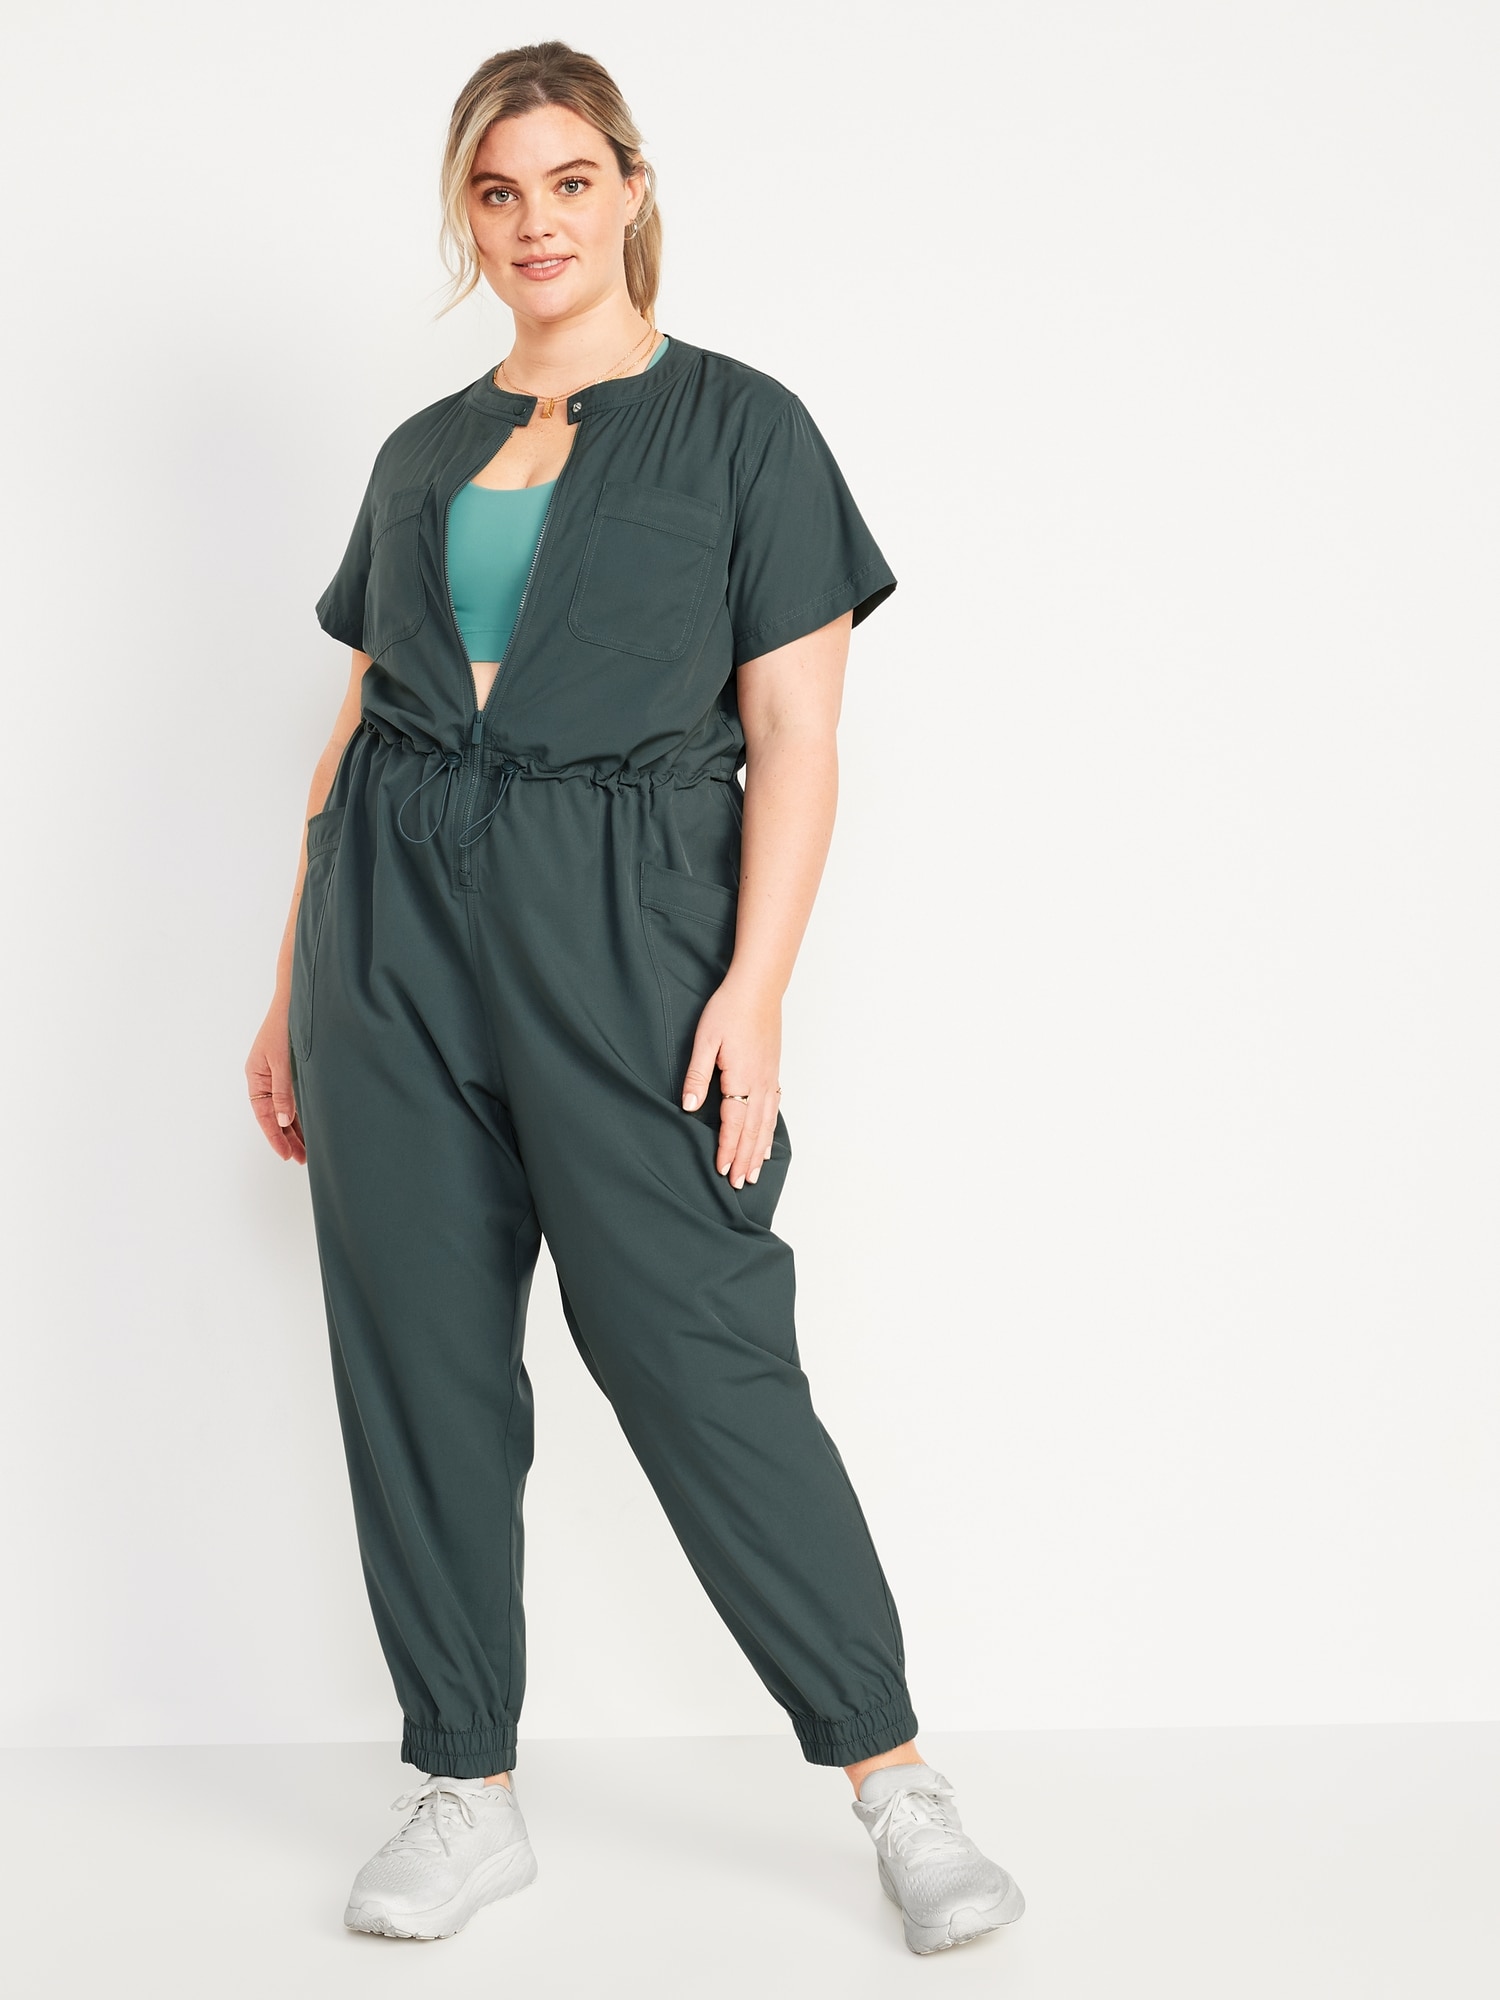 Short-Sleeve StretchTech Collarless Jumpsuit for Women | Old Navy